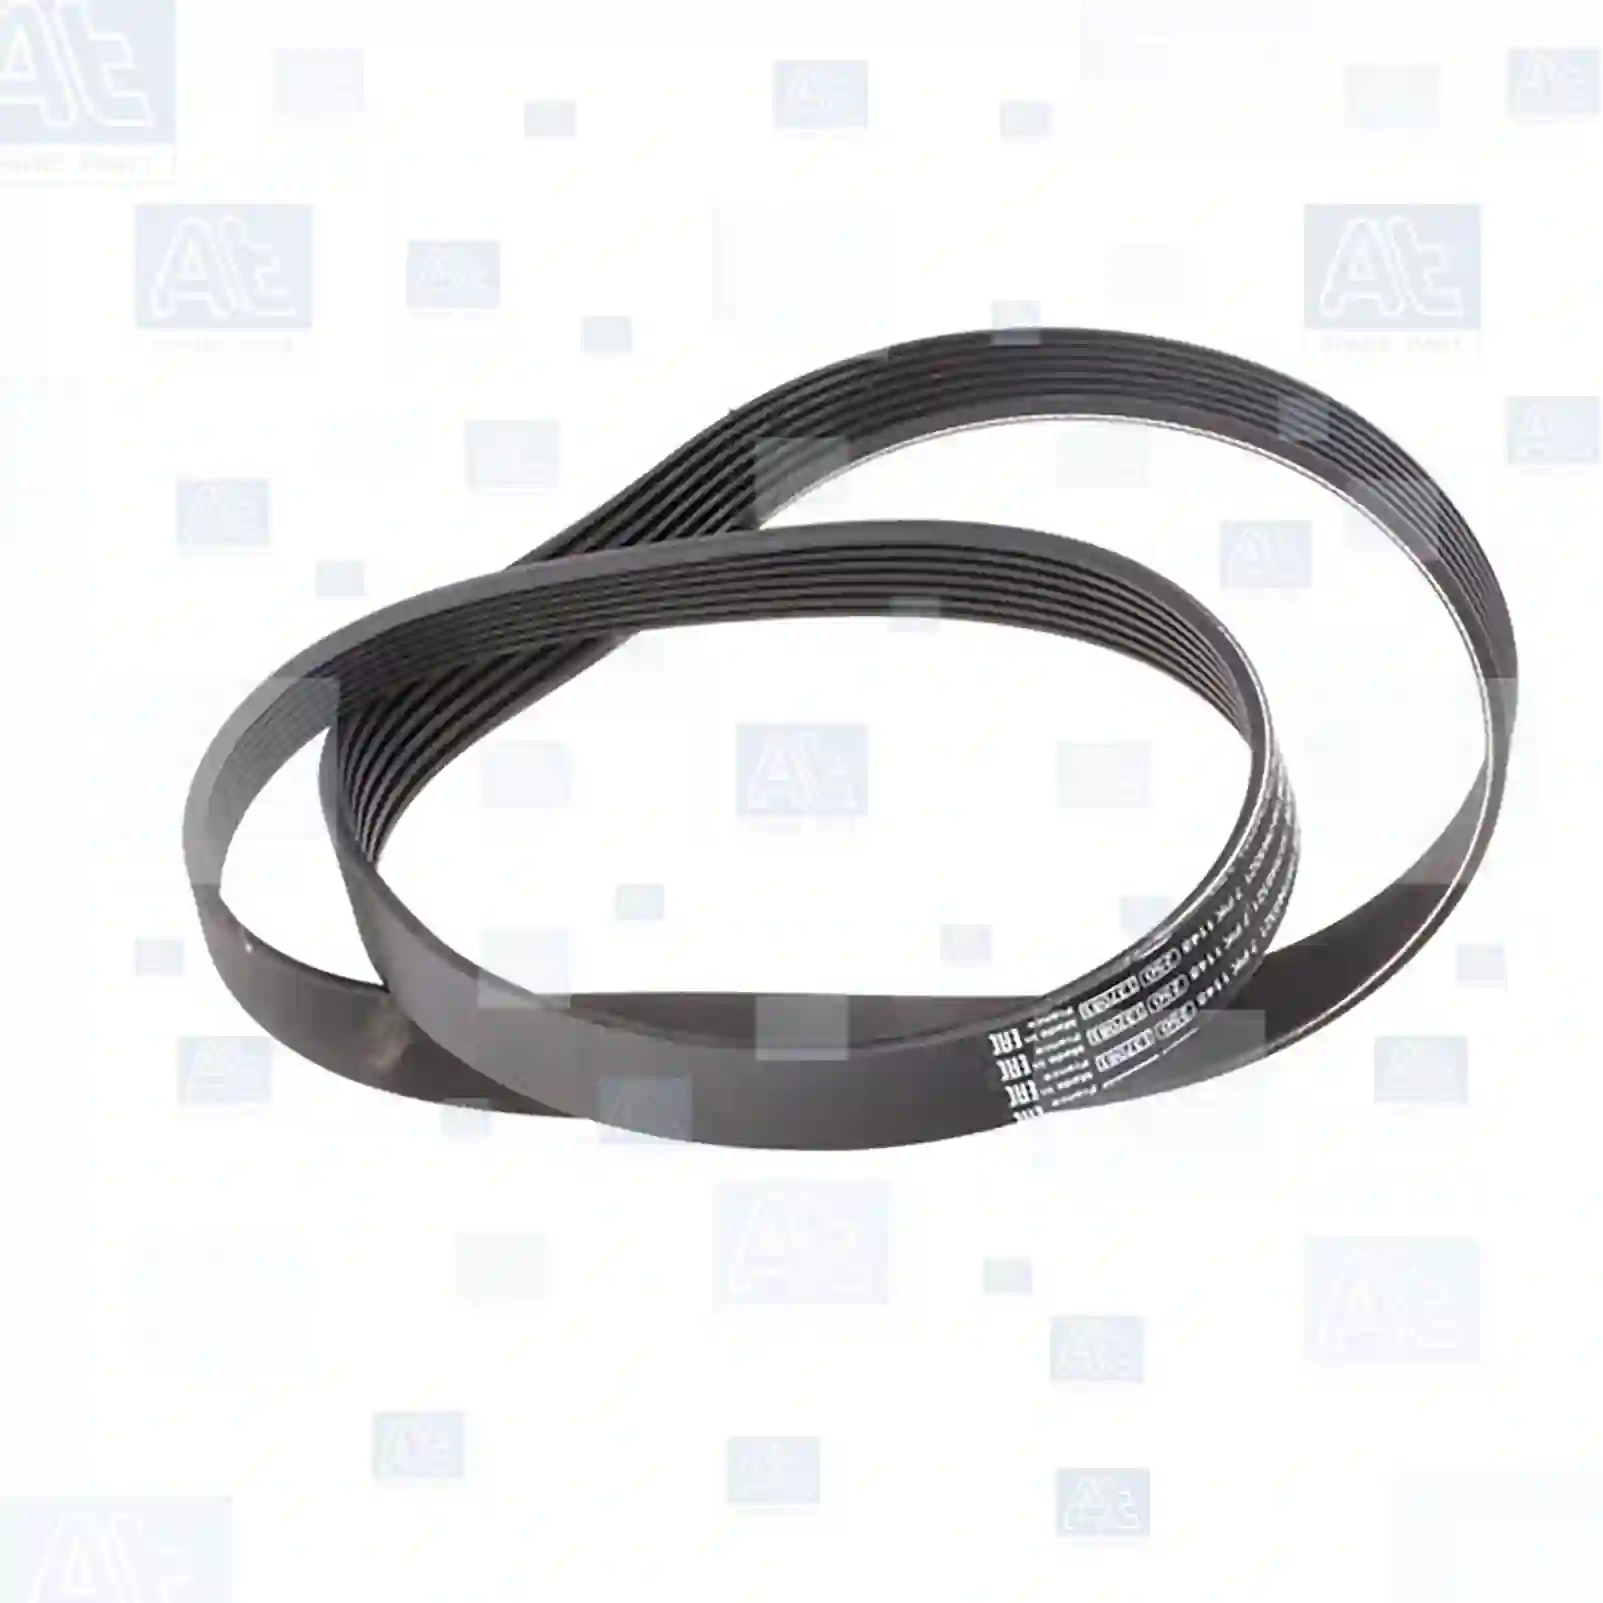 Multiribbed belt, 77707787, 60653029, 60676136, 71732386, 030145933AT, 030145933R, 03L903137, 03L903137G, 03L903137T, 30145933AT, WHT003848, 11281715713, 11287838200, 4792071, 4792071AB, 1611204980, 575099, 9675874480, 9805463680, 4792071, 60653029, 60676136, 71732386, 9615208280, 96152082, 07766685, 46414859, 60676136, 71732386, 9615208280, 96152082, 0039935396, MD165995, MD187463, MD317142, MD318667, 11720-0W000, 11720-0W002, 11720-VC200, 11920-BX005, 1611204980, 575099, 9675874480, 9805463680, 030145933AT, 030145933E, 030145933L, 030145933M, 030145933R, 030145933T, 03L903137, 03L903137C, 03L903137E, 03L903137G, 03L903137T, 30145933AT, 030145933AT, 030145933E, 030145933G, 030145933L, 030145933R, 030145933T, 03L903137, 03L903137T, 30145933AT, 030145933AT, 030145933E, 030145933G, 030145933L, 030145933M, 030145933T, 030145966L, 03L903137E, 03L903137T, 044903137AE, 045145933L, 30145933AT, 44903137AE ||  77707787 At Spare Part | Engine, Accelerator Pedal, Camshaft, Connecting Rod, Crankcase, Crankshaft, Cylinder Head, Engine Suspension Mountings, Exhaust Manifold, Exhaust Gas Recirculation, Filter Kits, Flywheel Housing, General Overhaul Kits, Engine, Intake Manifold, Oil Cleaner, Oil Cooler, Oil Filter, Oil Pump, Oil Sump, Piston & Liner, Sensor & Switch, Timing Case, Turbocharger, Cooling System, Belt Tensioner, Coolant Filter, Coolant Pipe, Corrosion Prevention Agent, Drive, Expansion Tank, Fan, Intercooler, Monitors & Gauges, Radiator, Thermostat, V-Belt / Timing belt, Water Pump, Fuel System, Electronical Injector Unit, Feed Pump, Fuel Filter, cpl., Fuel Gauge Sender,  Fuel Line, Fuel Pump, Fuel Tank, Injection Line Kit, Injection Pump, Exhaust System, Clutch & Pedal, Gearbox, Propeller Shaft, Axles, Brake System, Hubs & Wheels, Suspension, Leaf Spring, Universal Parts / Accessories, Steering, Electrical System, Cabin Multiribbed belt, 77707787, 60653029, 60676136, 71732386, 030145933AT, 030145933R, 03L903137, 03L903137G, 03L903137T, 30145933AT, WHT003848, 11281715713, 11287838200, 4792071, 4792071AB, 1611204980, 575099, 9675874480, 9805463680, 4792071, 60653029, 60676136, 71732386, 9615208280, 96152082, 07766685, 46414859, 60676136, 71732386, 9615208280, 96152082, 0039935396, MD165995, MD187463, MD317142, MD318667, 11720-0W000, 11720-0W002, 11720-VC200, 11920-BX005, 1611204980, 575099, 9675874480, 9805463680, 030145933AT, 030145933E, 030145933L, 030145933M, 030145933R, 030145933T, 03L903137, 03L903137C, 03L903137E, 03L903137G, 03L903137T, 30145933AT, 030145933AT, 030145933E, 030145933G, 030145933L, 030145933R, 030145933T, 03L903137, 03L903137T, 30145933AT, 030145933AT, 030145933E, 030145933G, 030145933L, 030145933M, 030145933T, 030145966L, 03L903137E, 03L903137T, 044903137AE, 045145933L, 30145933AT, 44903137AE ||  77707787 At Spare Part | Engine, Accelerator Pedal, Camshaft, Connecting Rod, Crankcase, Crankshaft, Cylinder Head, Engine Suspension Mountings, Exhaust Manifold, Exhaust Gas Recirculation, Filter Kits, Flywheel Housing, General Overhaul Kits, Engine, Intake Manifold, Oil Cleaner, Oil Cooler, Oil Filter, Oil Pump, Oil Sump, Piston & Liner, Sensor & Switch, Timing Case, Turbocharger, Cooling System, Belt Tensioner, Coolant Filter, Coolant Pipe, Corrosion Prevention Agent, Drive, Expansion Tank, Fan, Intercooler, Monitors & Gauges, Radiator, Thermostat, V-Belt / Timing belt, Water Pump, Fuel System, Electronical Injector Unit, Feed Pump, Fuel Filter, cpl., Fuel Gauge Sender,  Fuel Line, Fuel Pump, Fuel Tank, Injection Line Kit, Injection Pump, Exhaust System, Clutch & Pedal, Gearbox, Propeller Shaft, Axles, Brake System, Hubs & Wheels, Suspension, Leaf Spring, Universal Parts / Accessories, Steering, Electrical System, Cabin